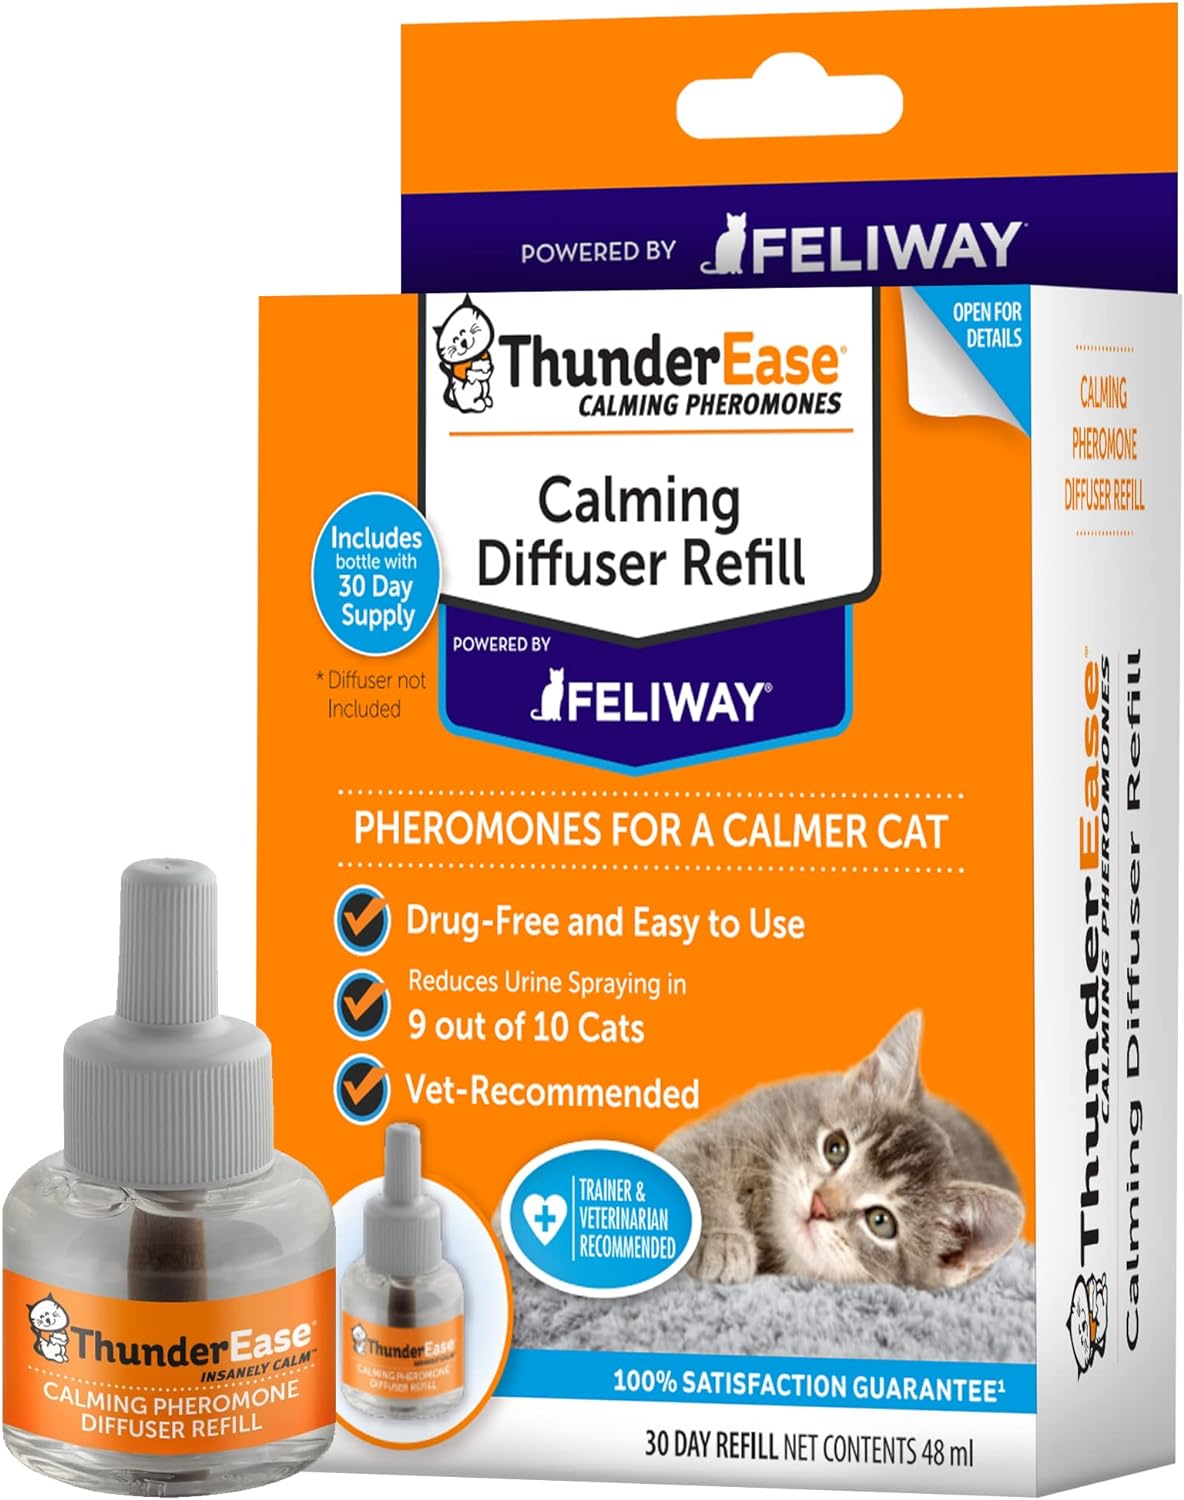 ThunderEase Cat Calming Pheromone Diffuser Refill | Powered by FELIWAY | Reduce Scratching, Urine Spraying, Marking, and Anxiety (30 Day Supply)